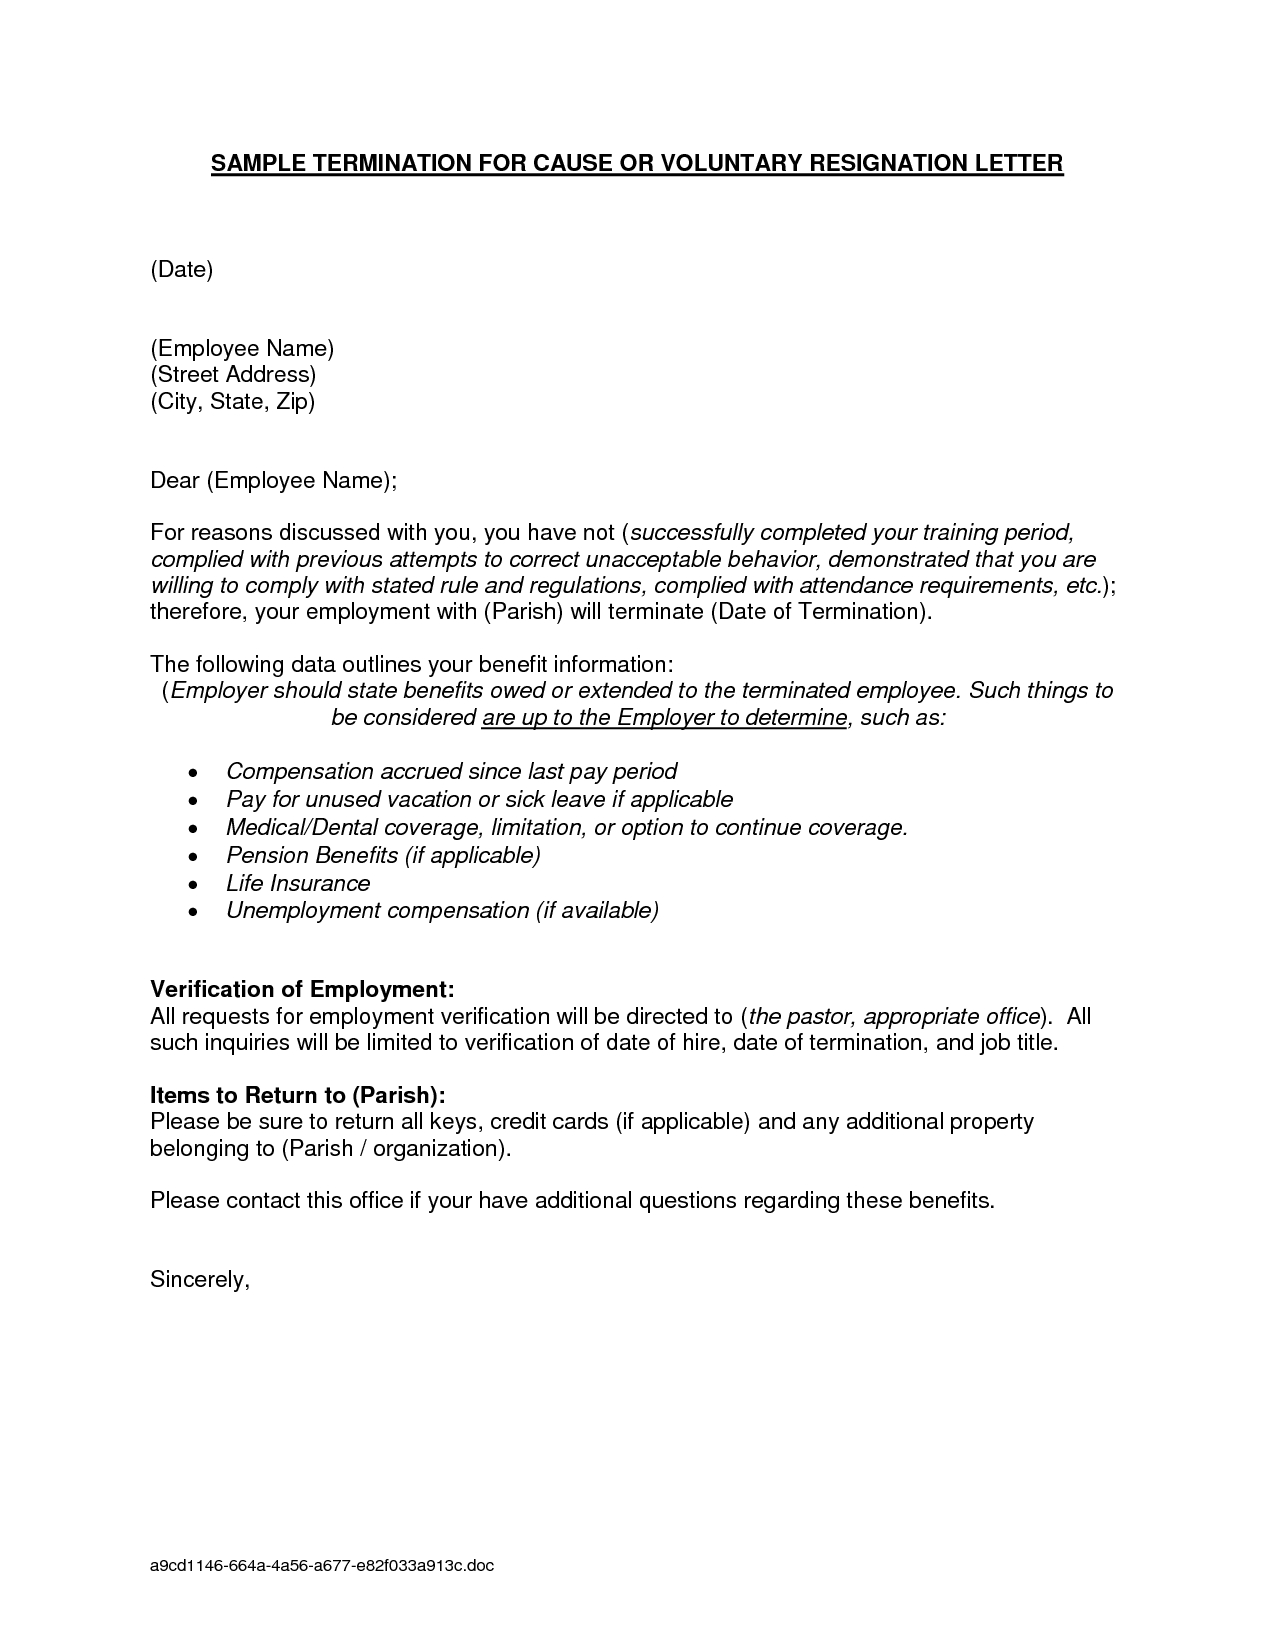 Sample Employee Termination Letter Template - Medical Resignation Letter Sample Due Illness Example Icover